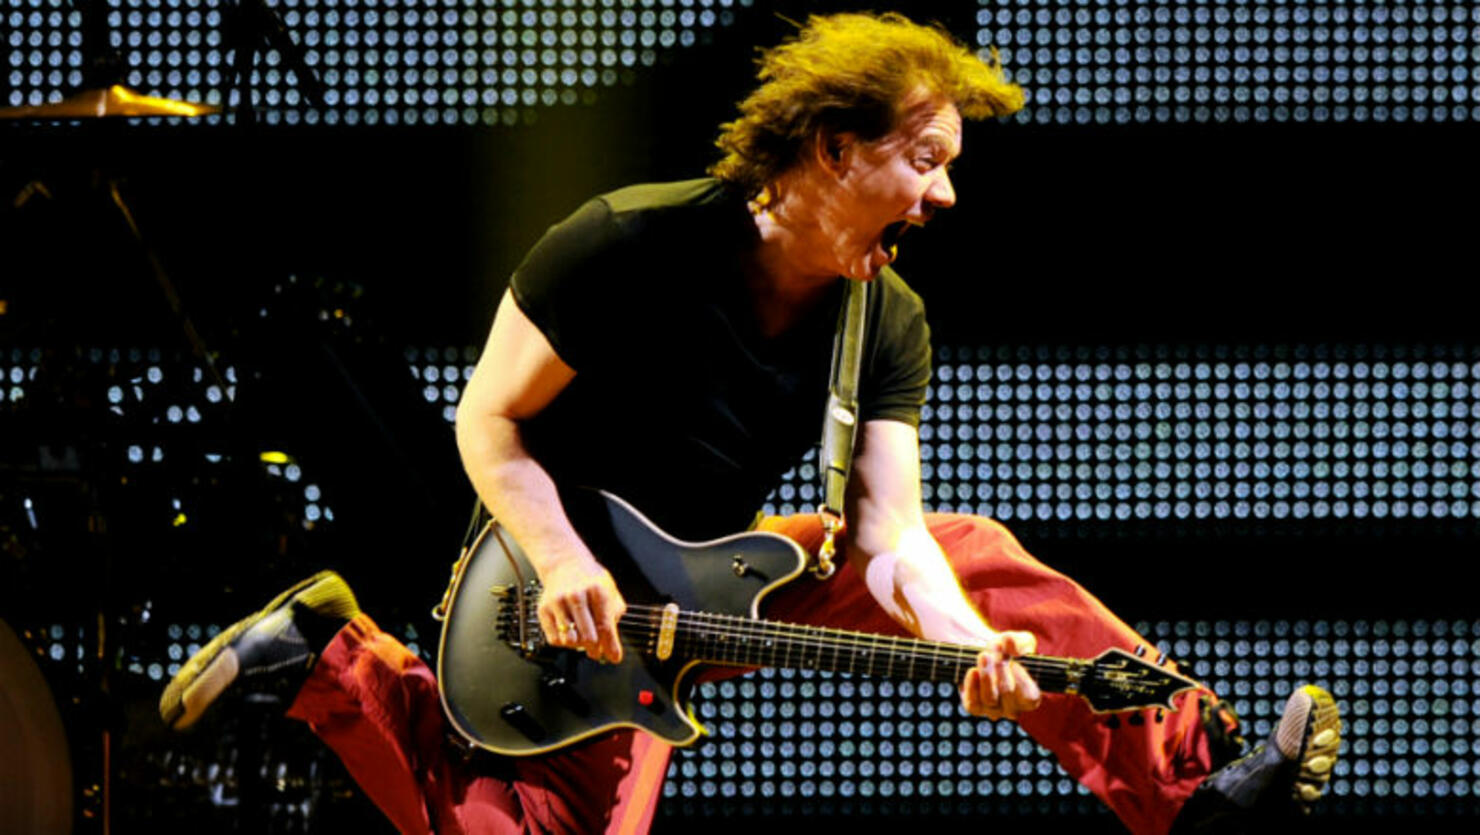 25 Things You Might Not Know About Birthday Boy Eddie Van Halen | iHeart